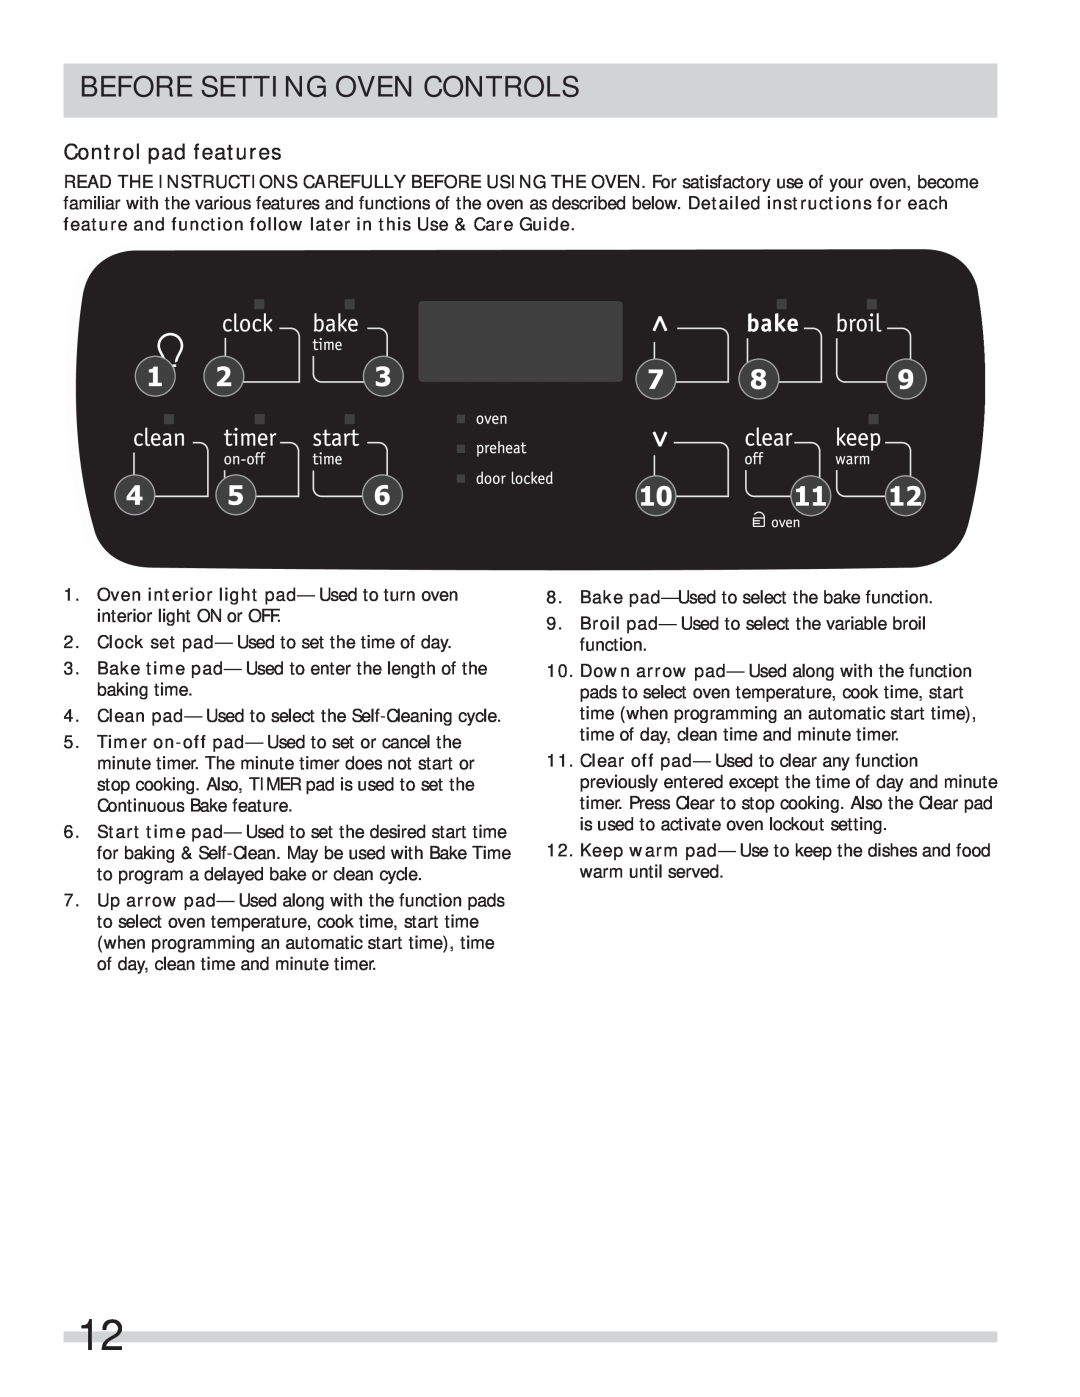 Frigidaire FFES3027LS important safety instructions Control pad features, Before Setting Oven Controls 